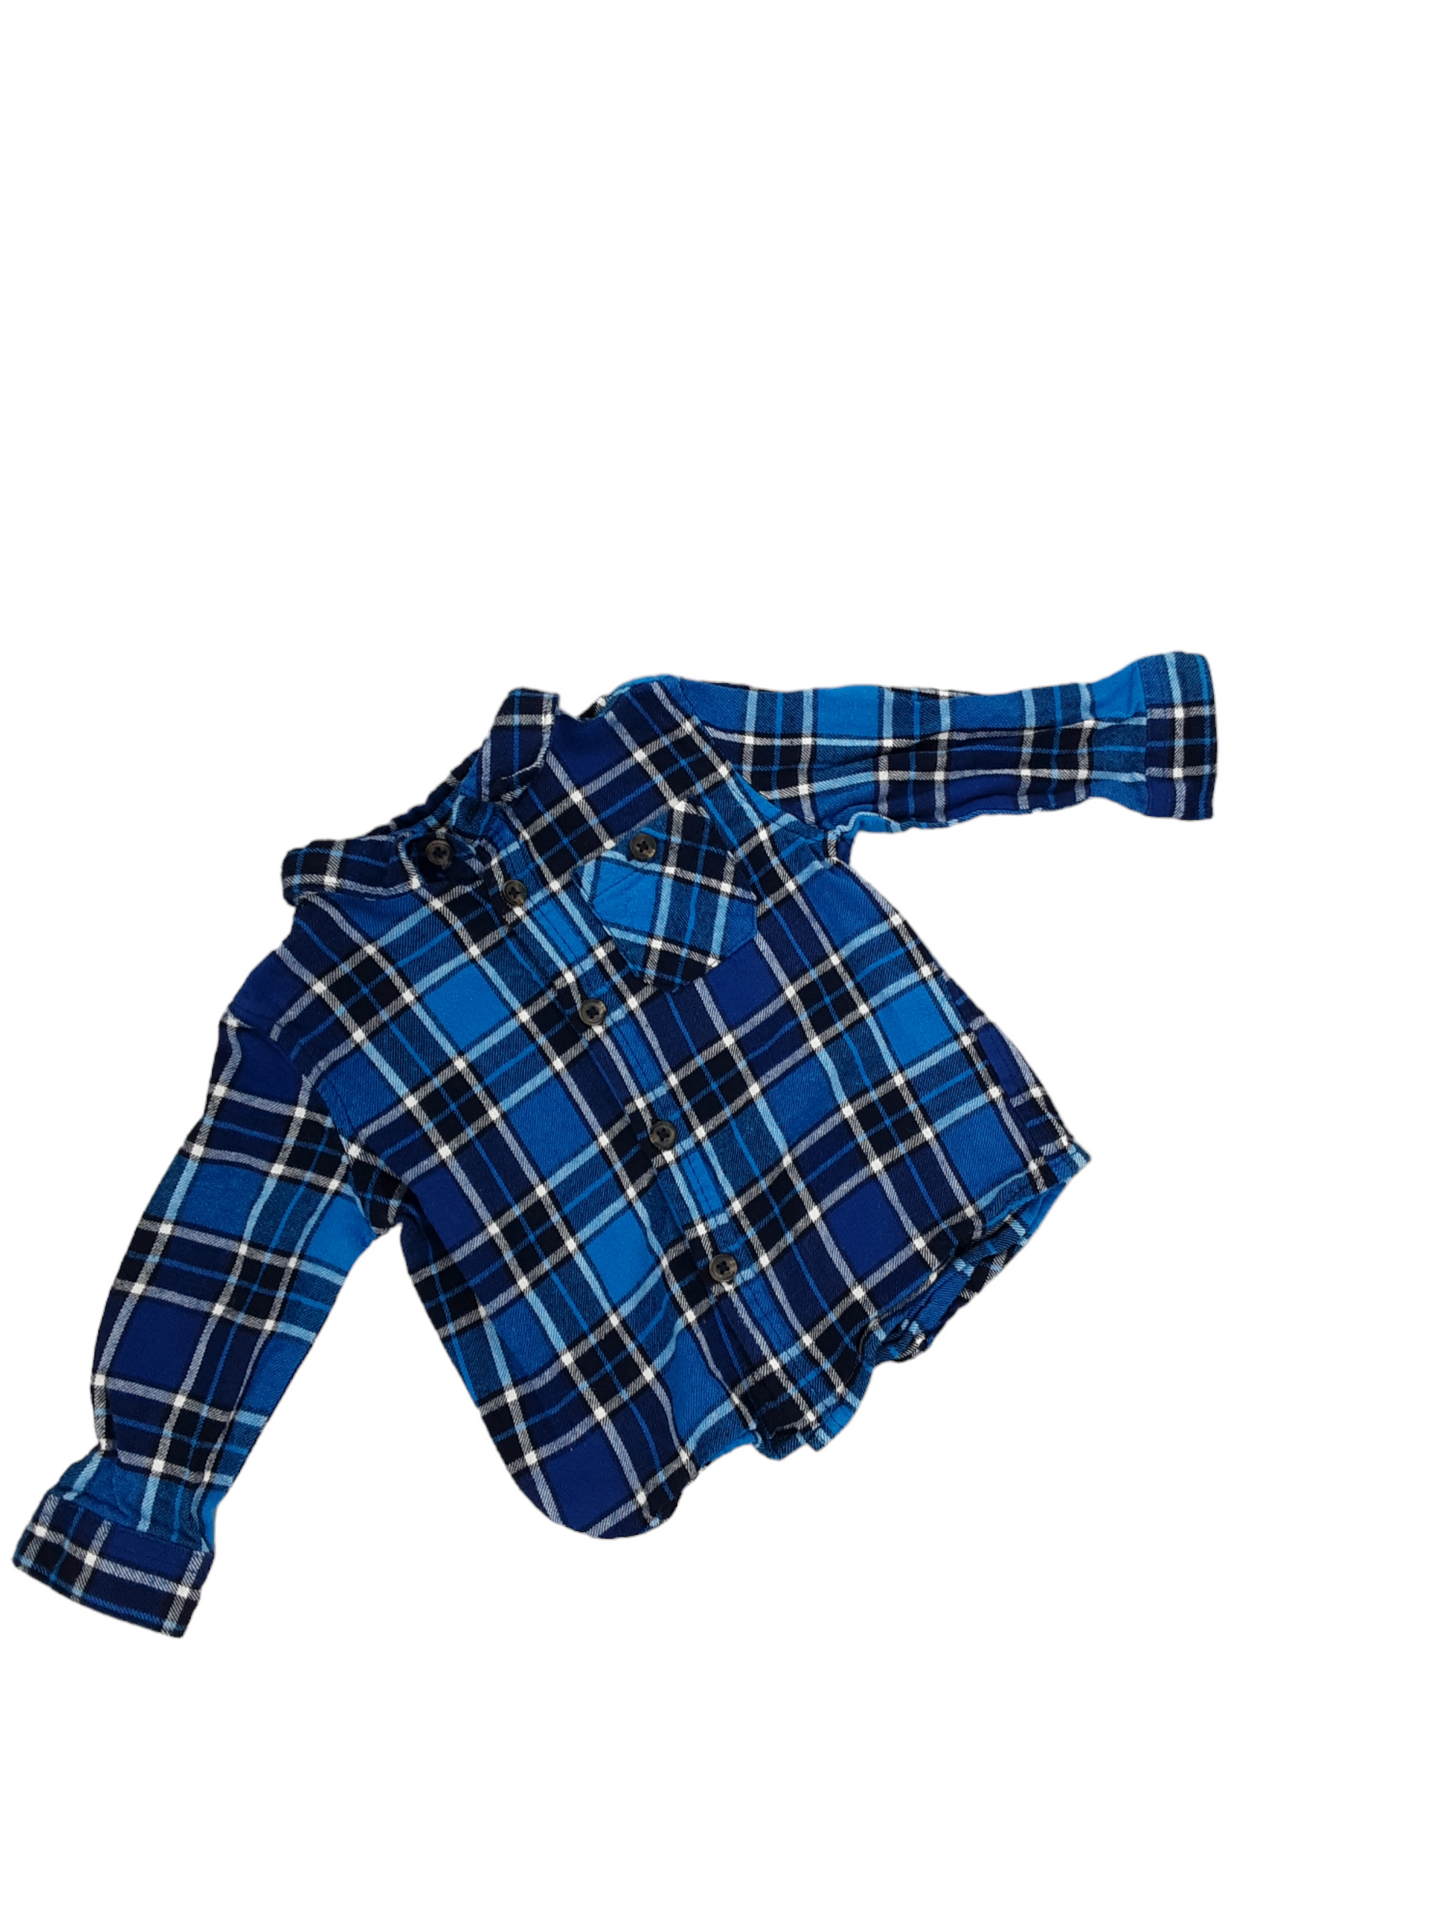 Blue plaid long sleeve size 12 to 18 months